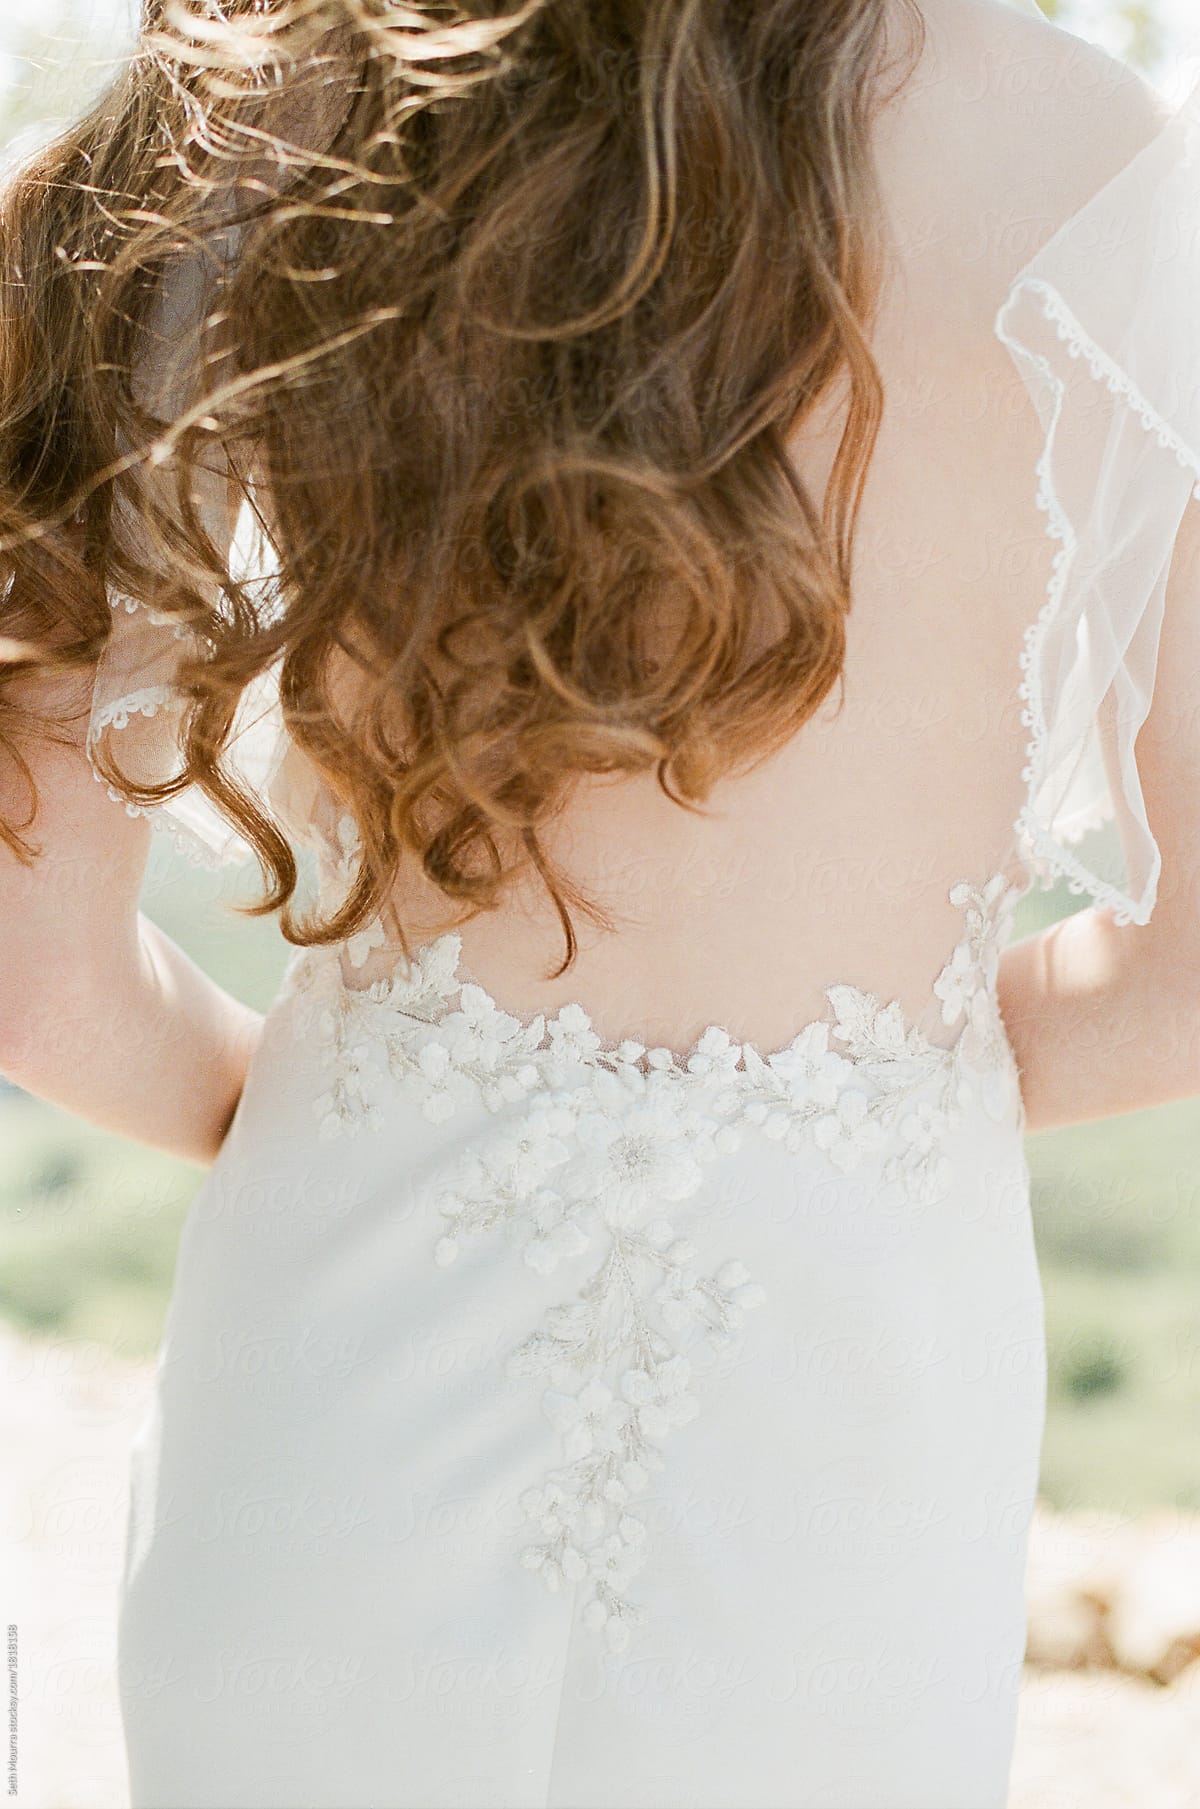 Romantic backless gown